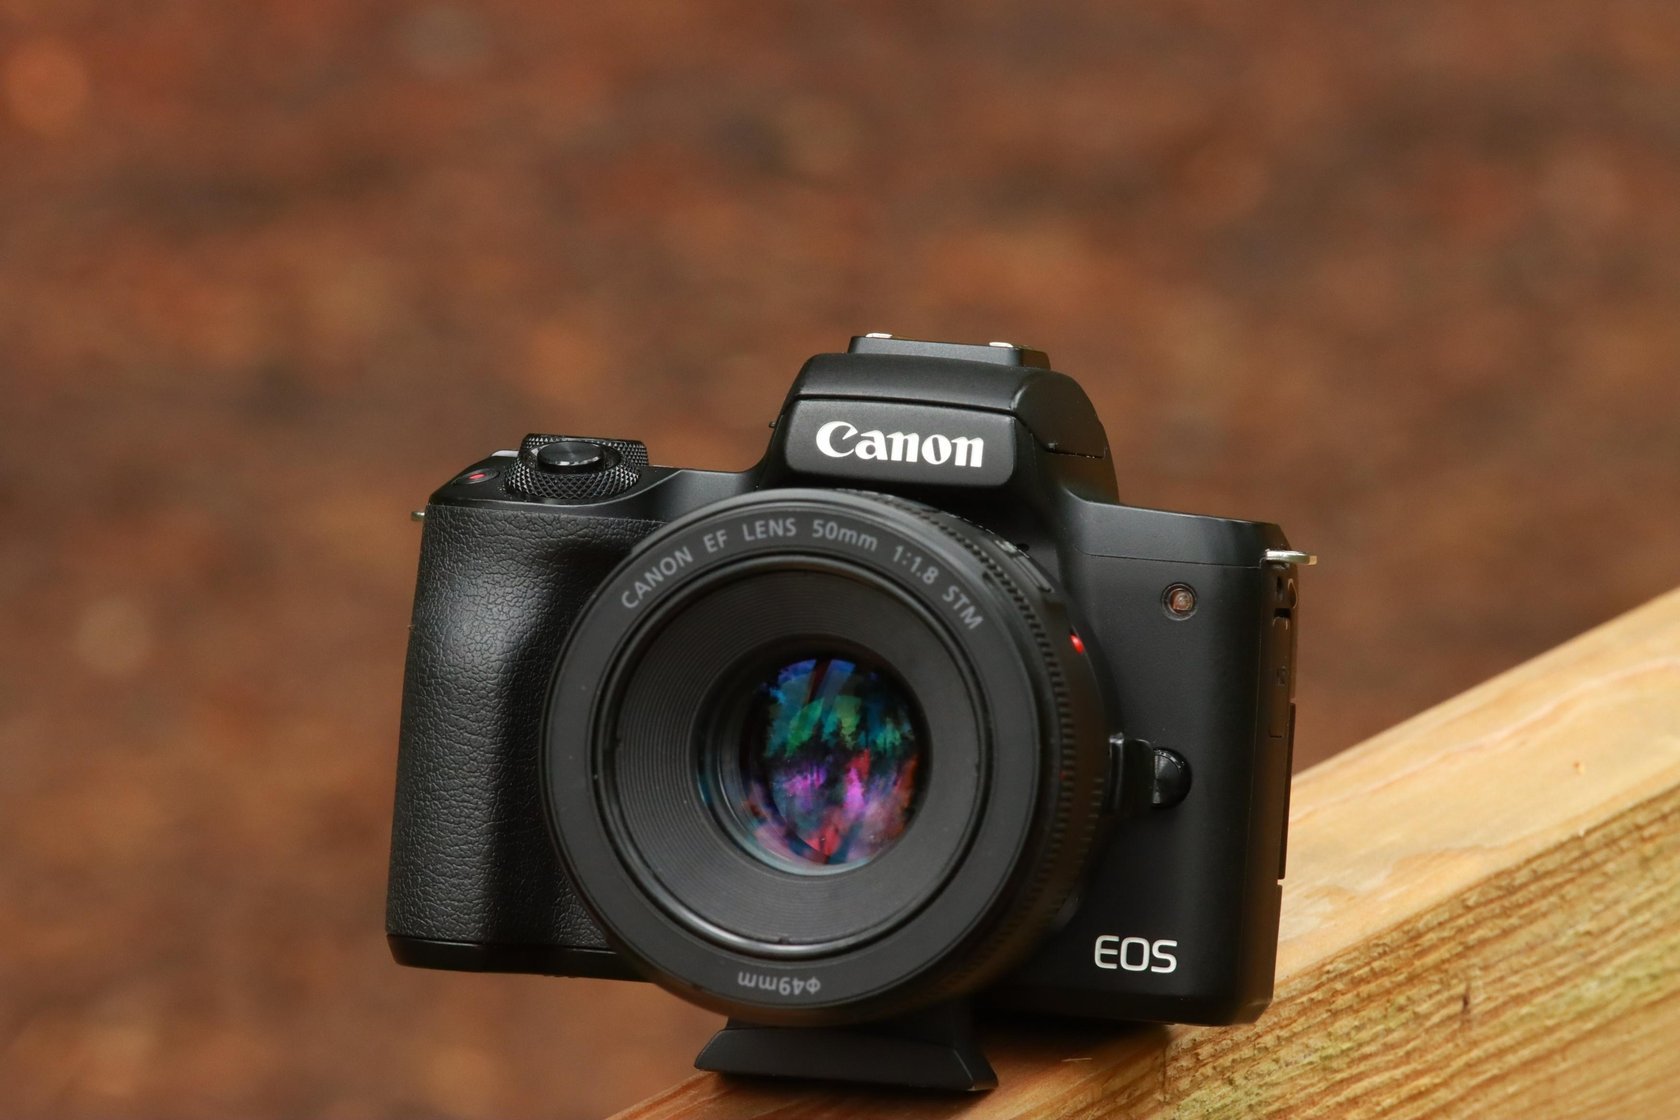 Make Photography Your New Hobby With These Top-Rated Cameras